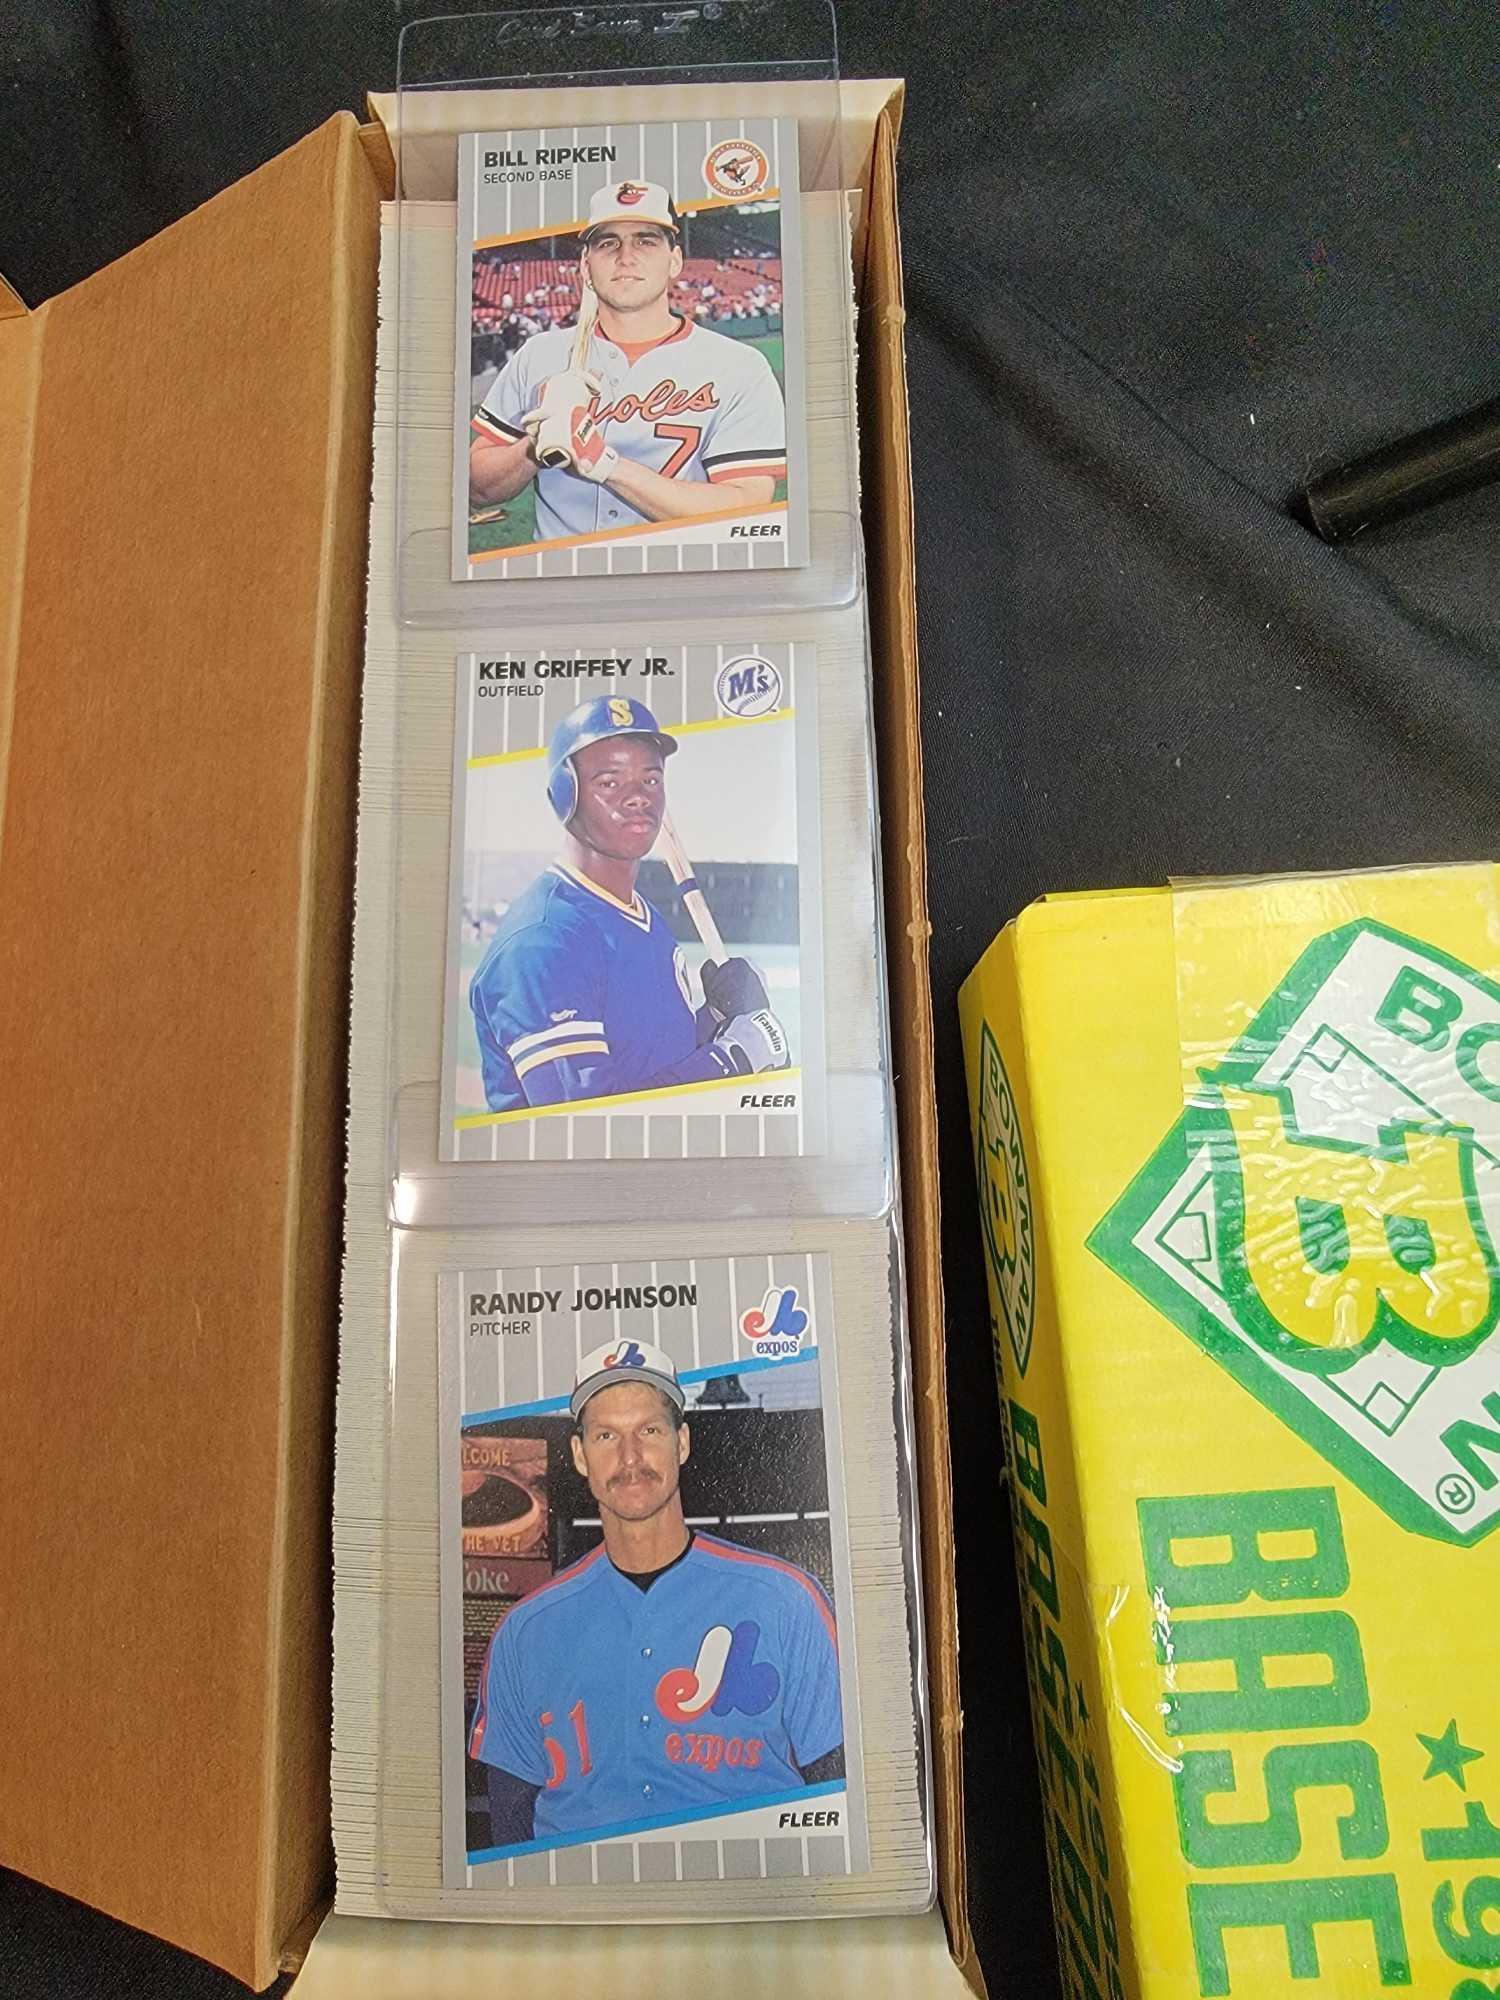 1987 to 1990 Baseball complete sets plus several boxes mixed sports cards HOFers RCs